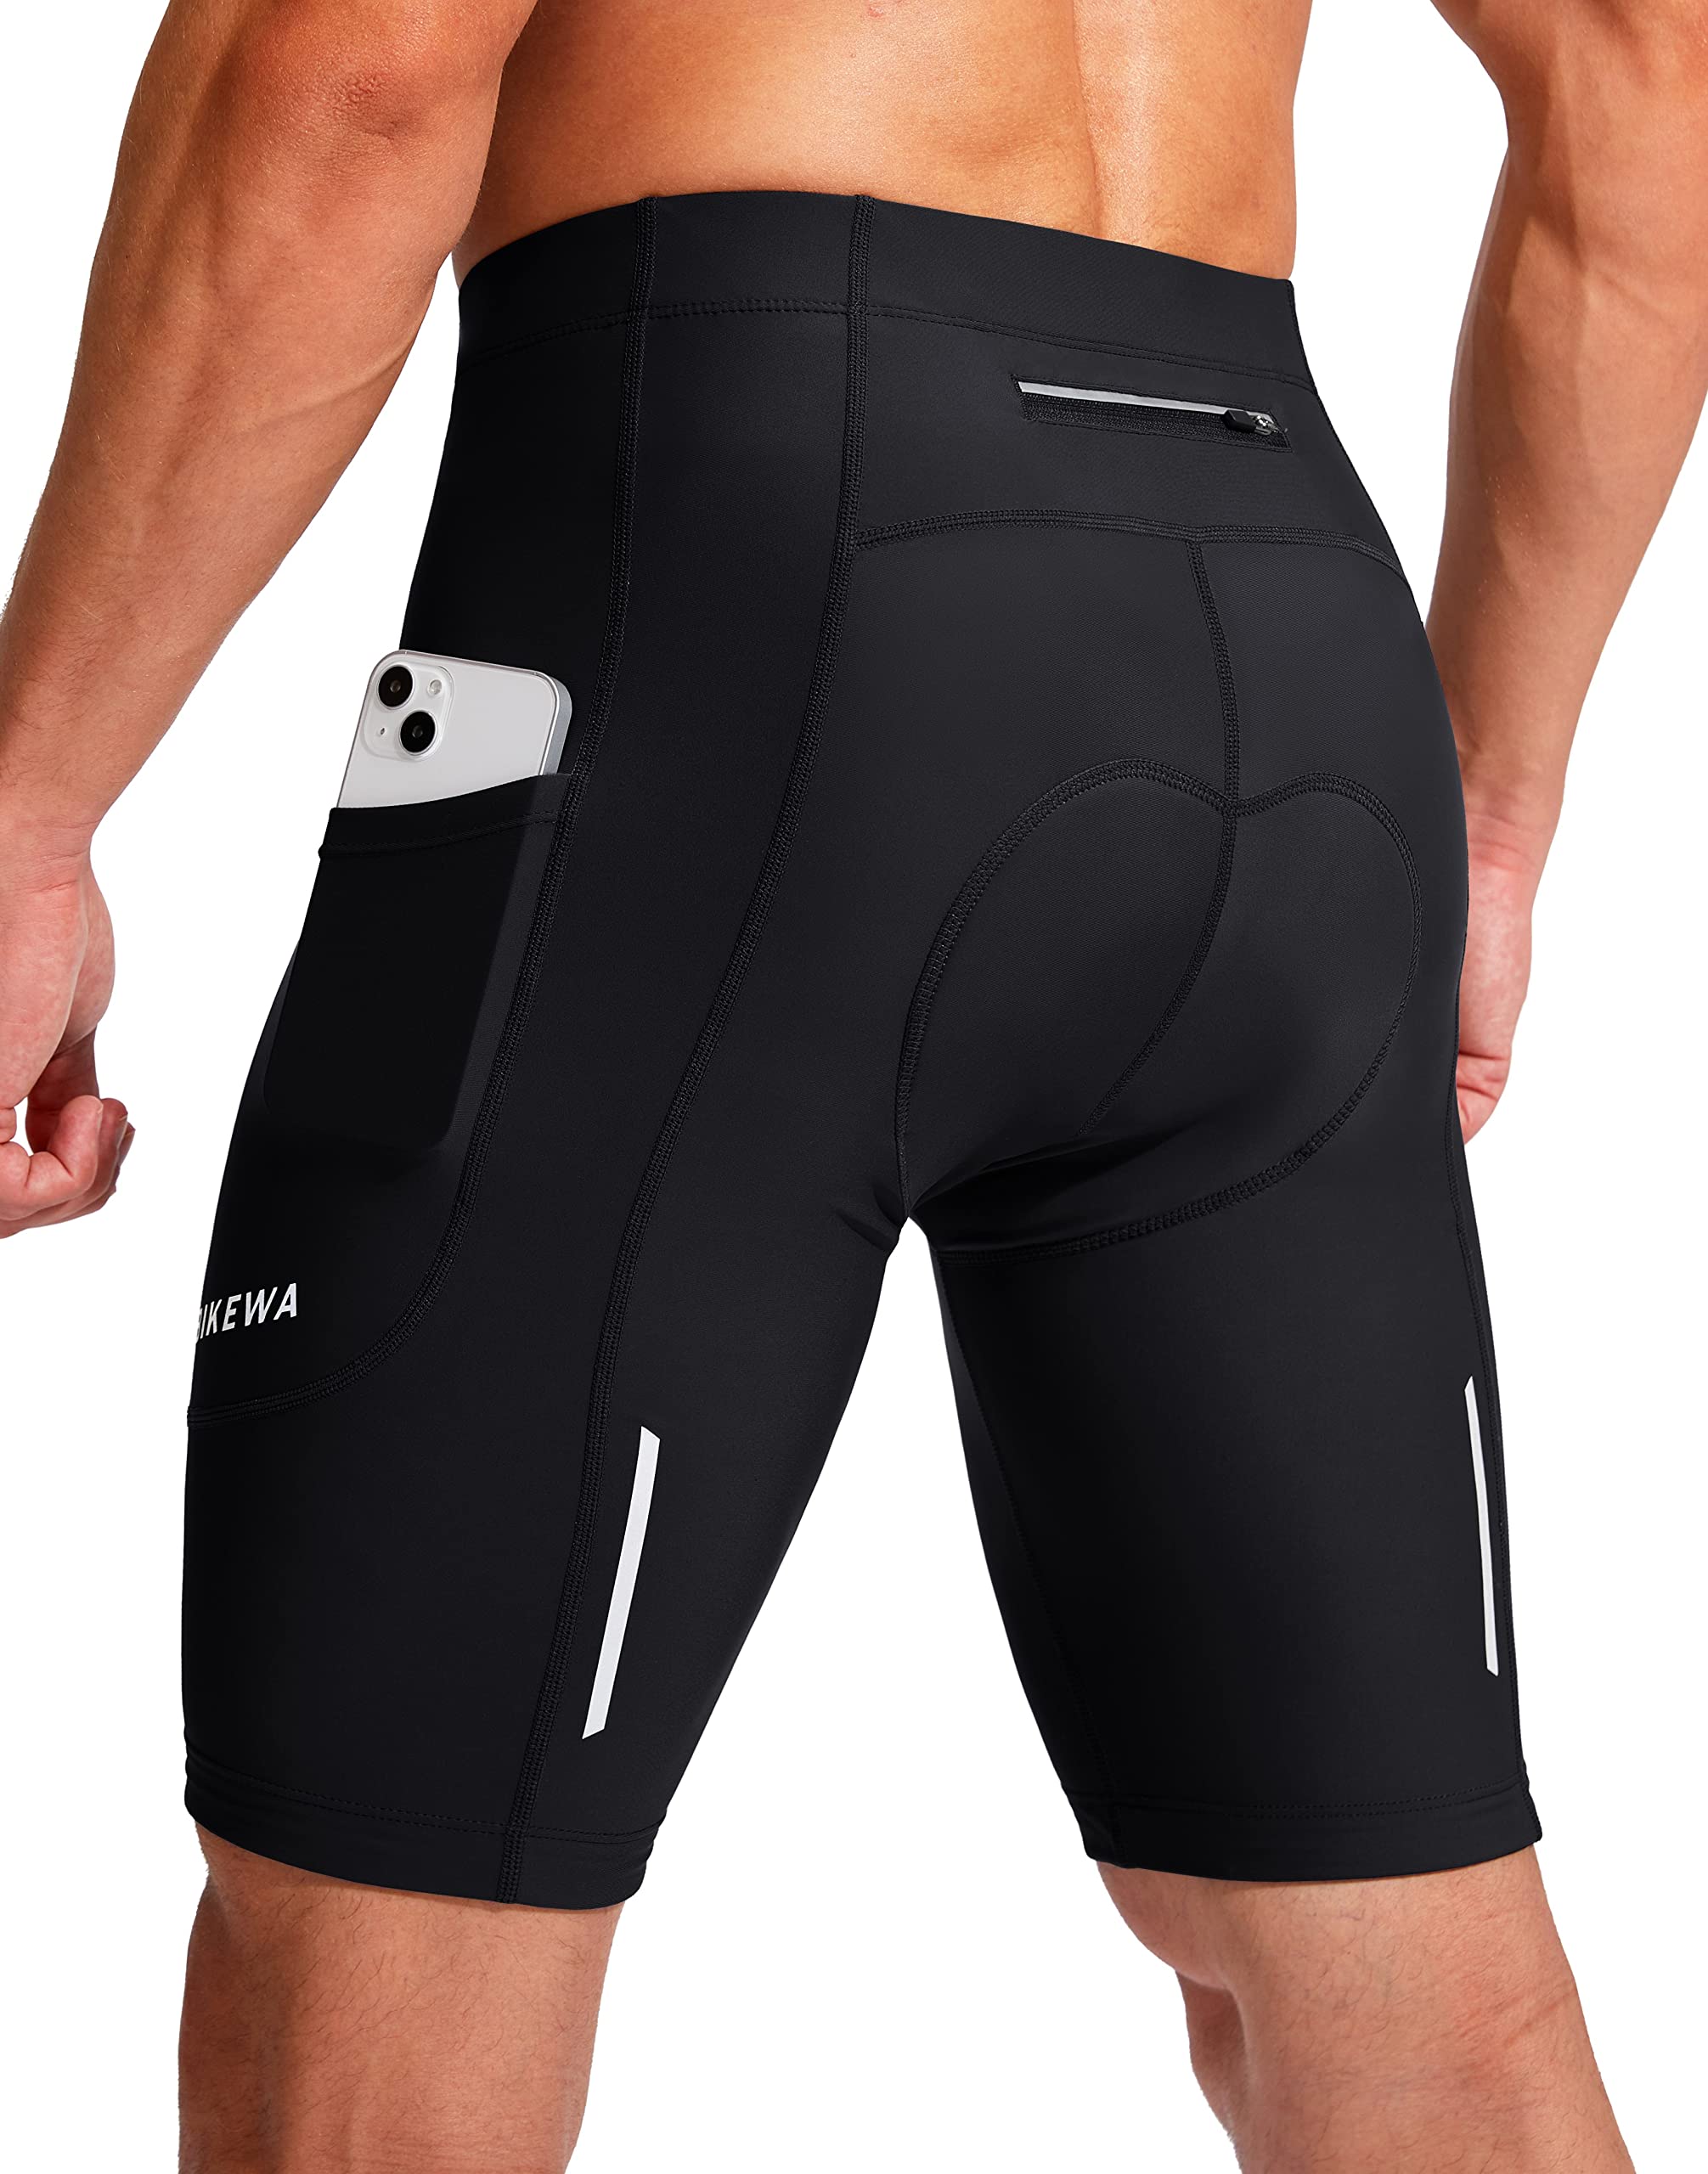 Men’s biker shorts – the first choice for sporty men插图2